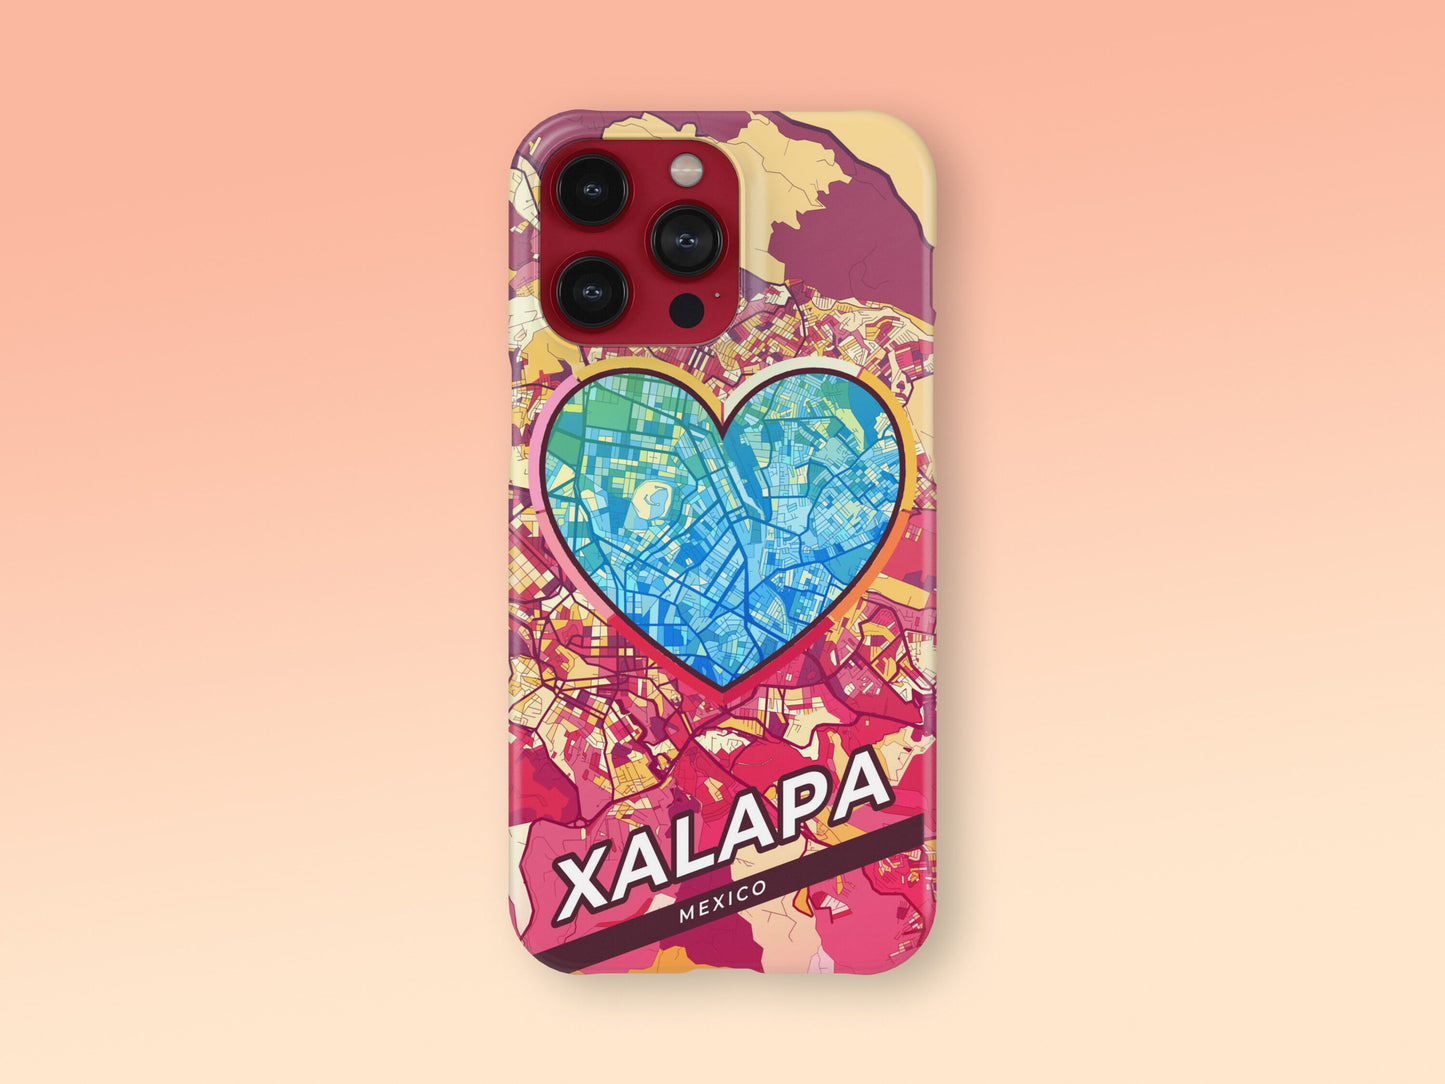 Xalapa Mexico slim phone case with colorful icon 2